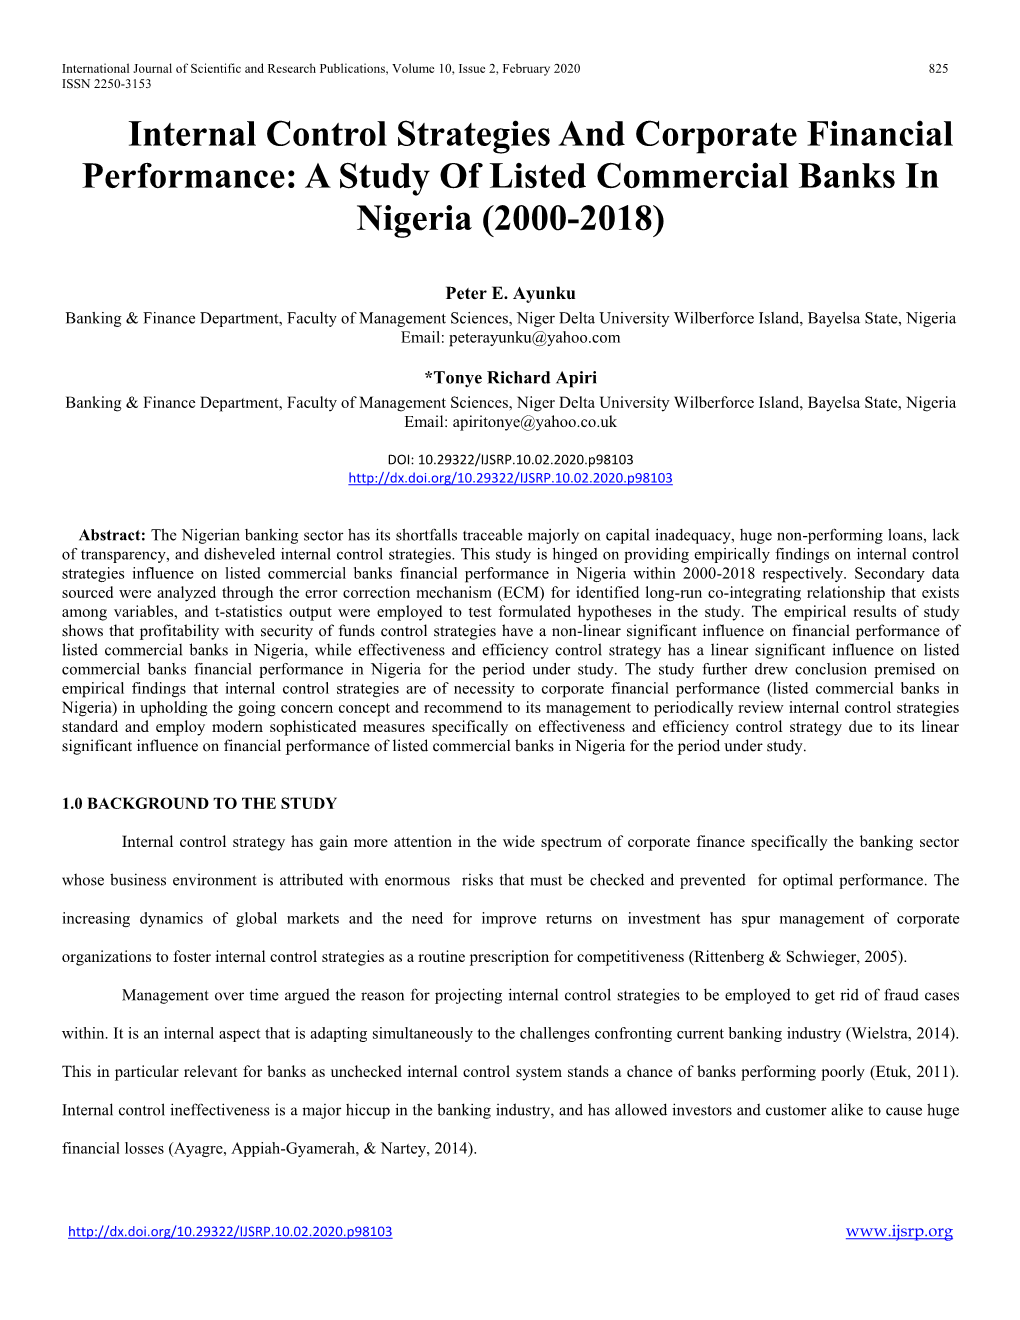 A Study of Listed Commercial Banks in Nigeria (2000-2018)